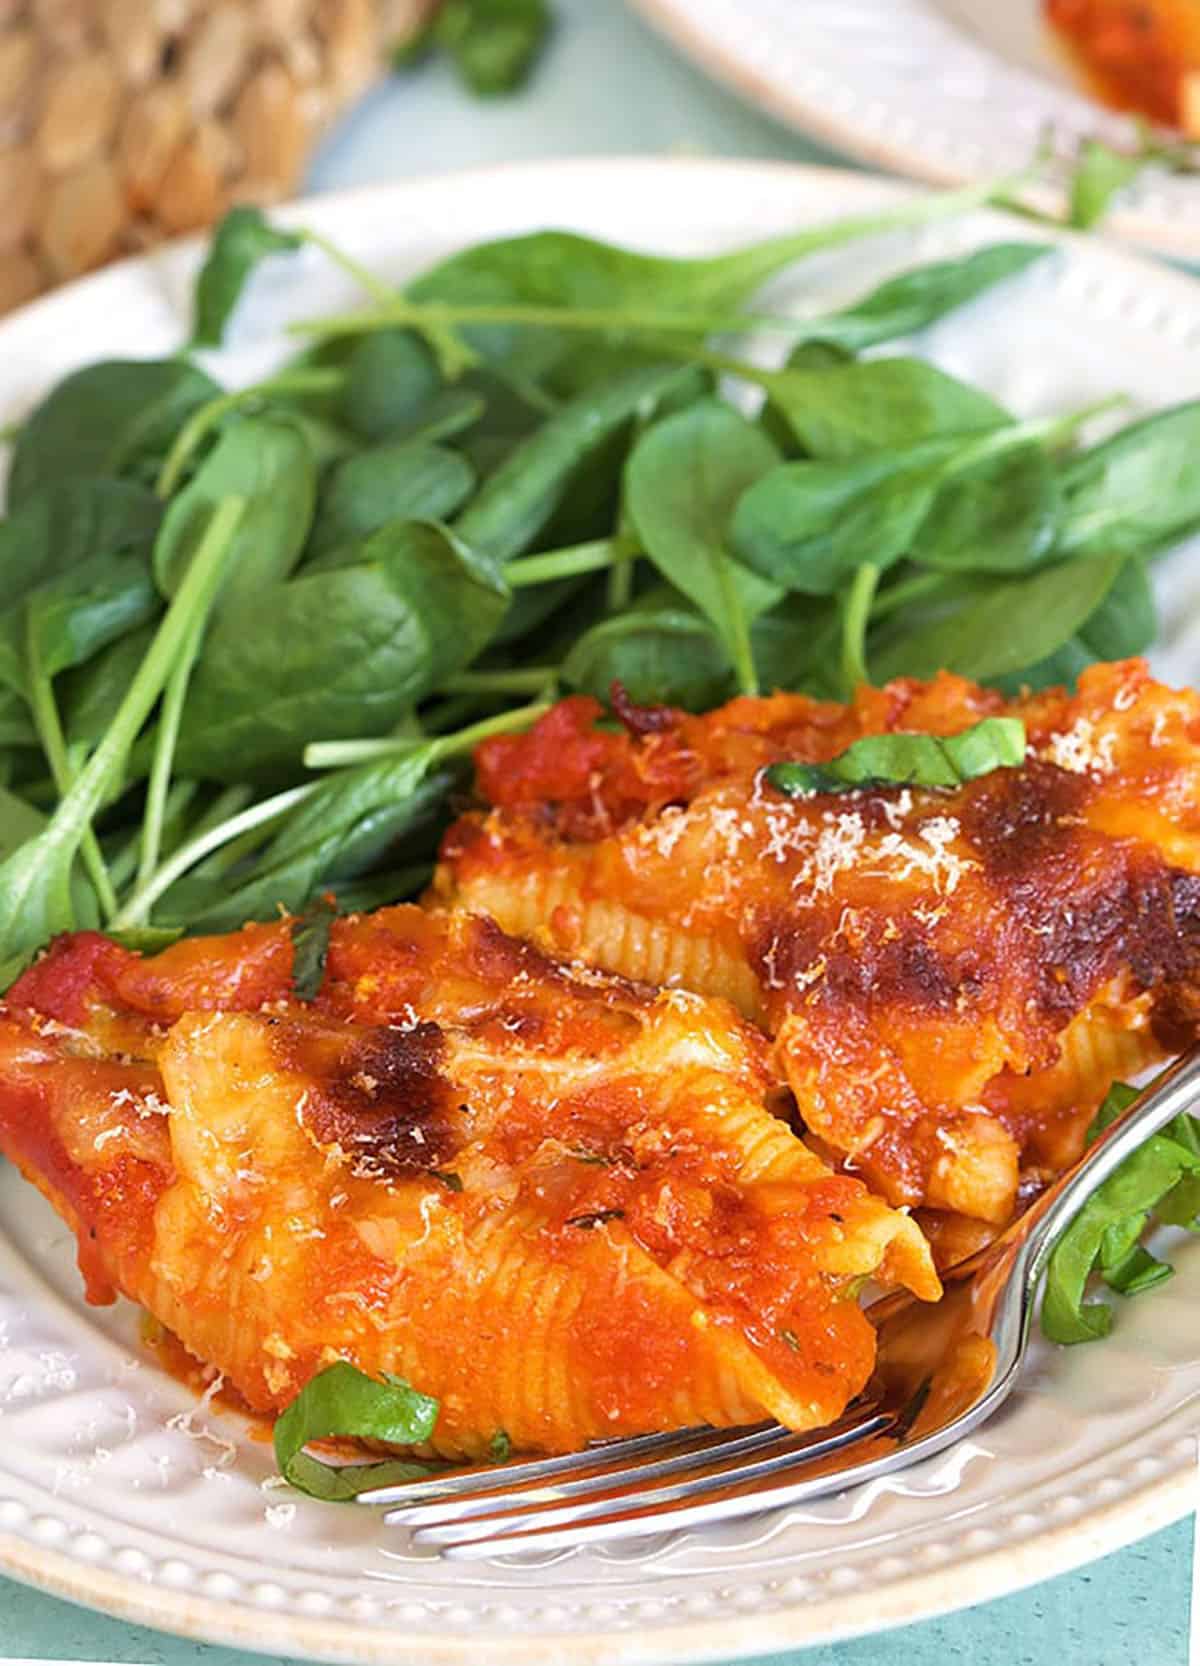 A serving of stuffed shells is on a white plate, next to a helping of spinach leaves.